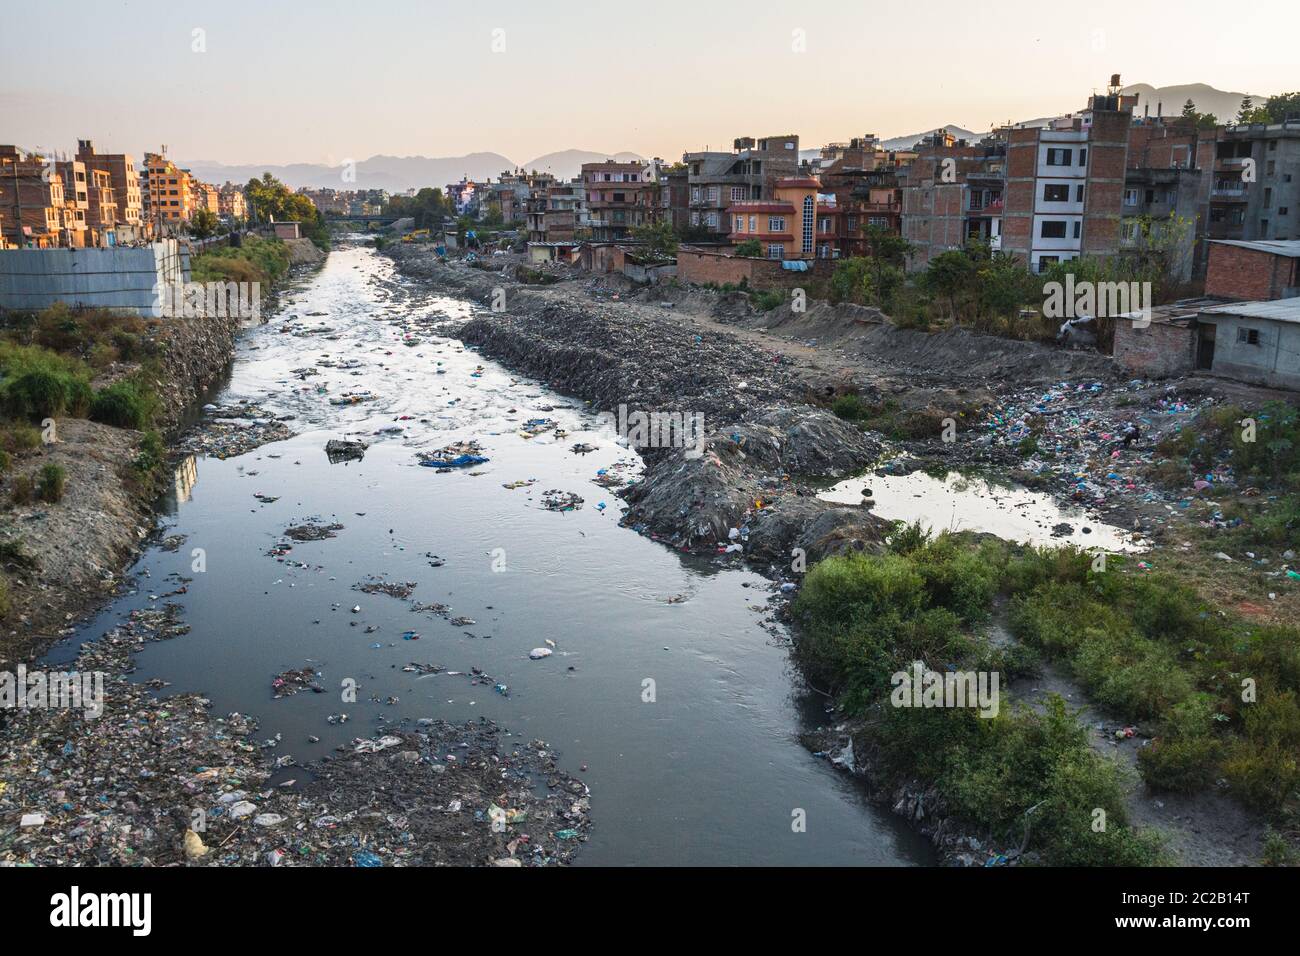 Contaminated river runs through city. waste is discarded river bank. lack of waste collection services. Kathmandu, Nepal, Asia Stock Photo